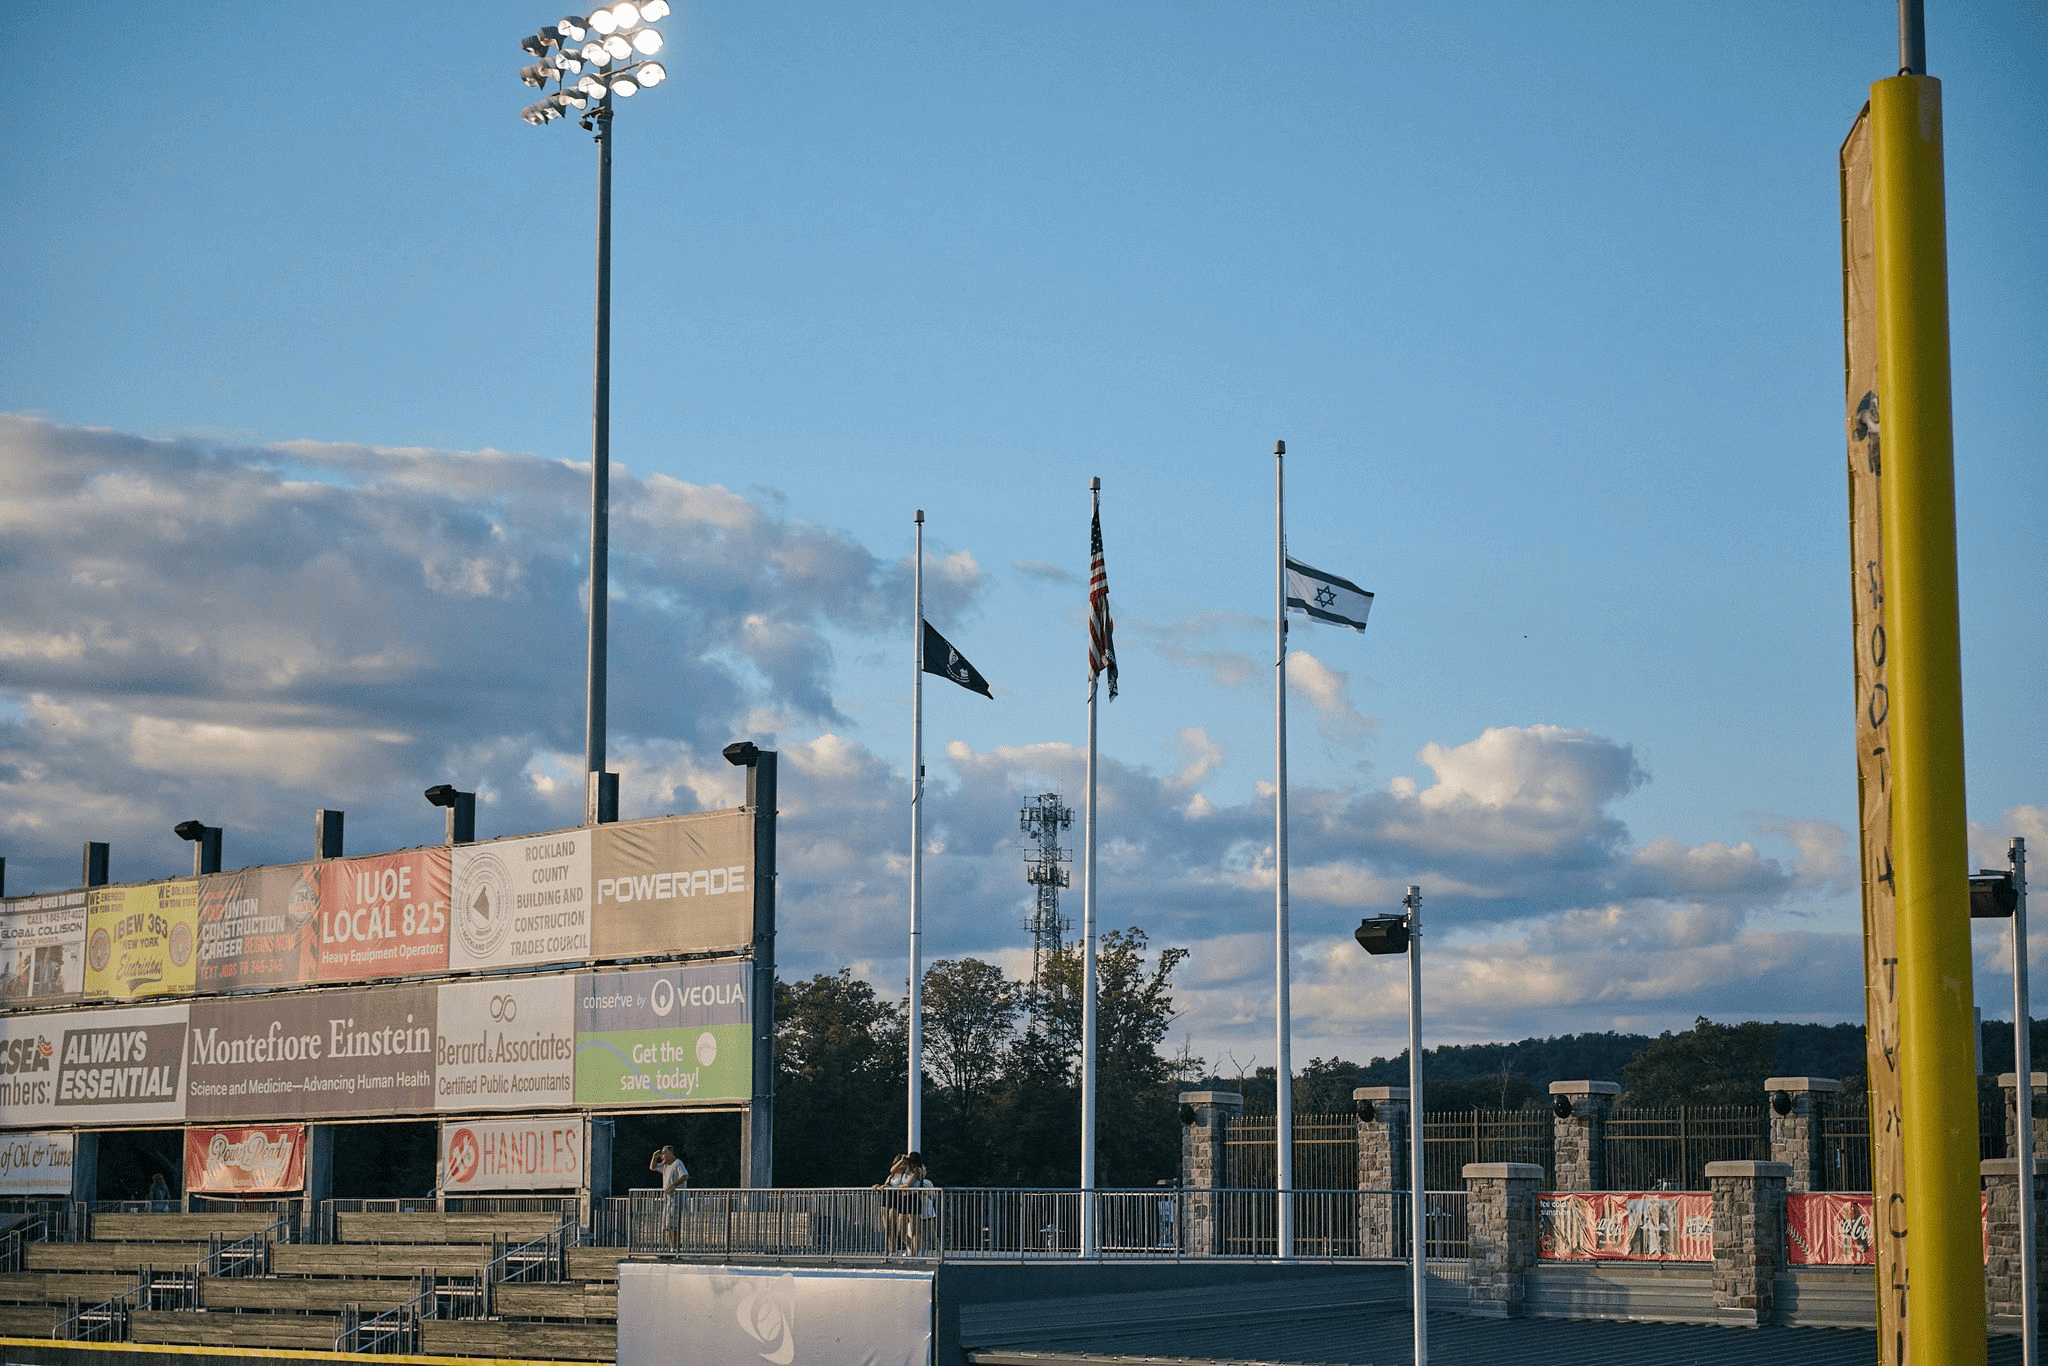 An Israeli flag was raised for Jewish Heritage Day at Clover Stadium in Rockland County, N.Y., on July 30, 2023. Photo by Perry Bindelglass.